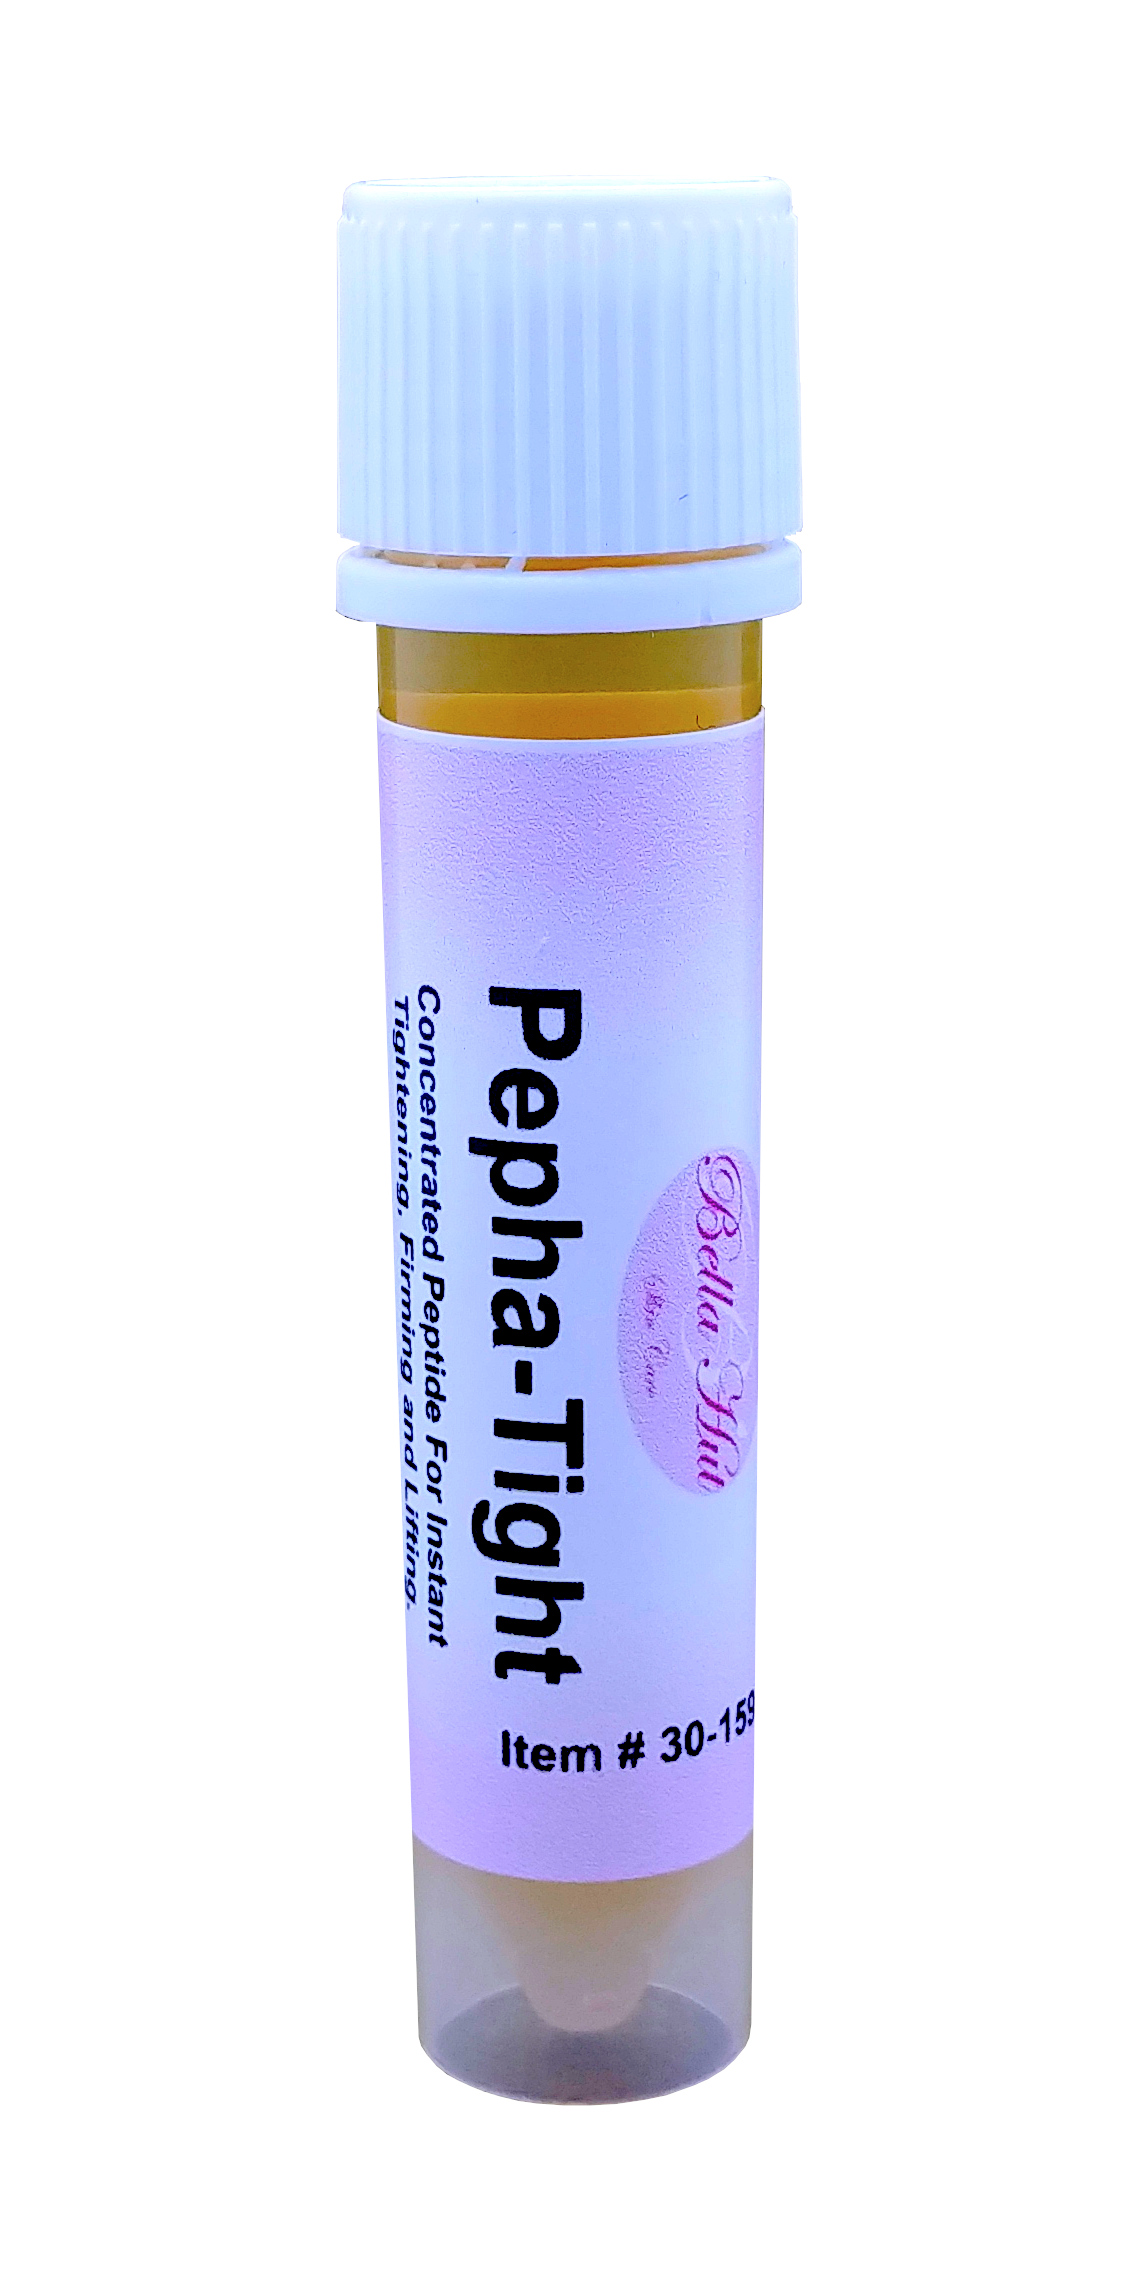 A raw peptide that is used to mix into creams and serums to make anti aging products